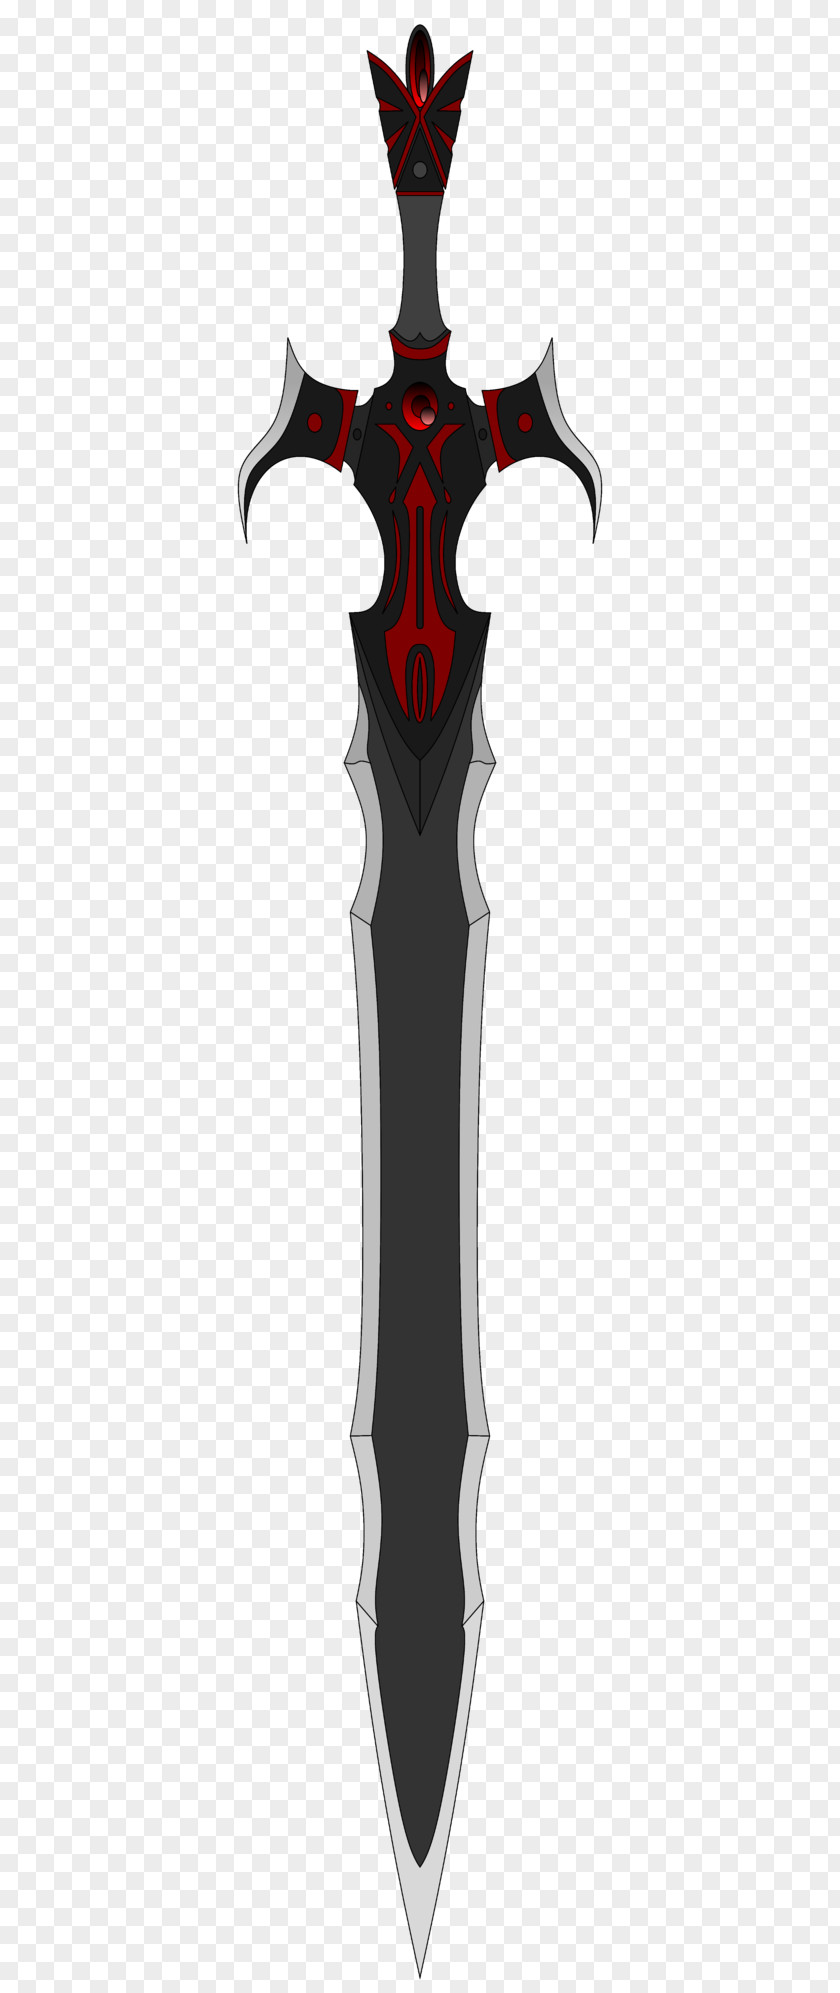 Knife With Blood Sword Costume Design Symbol Character PNG